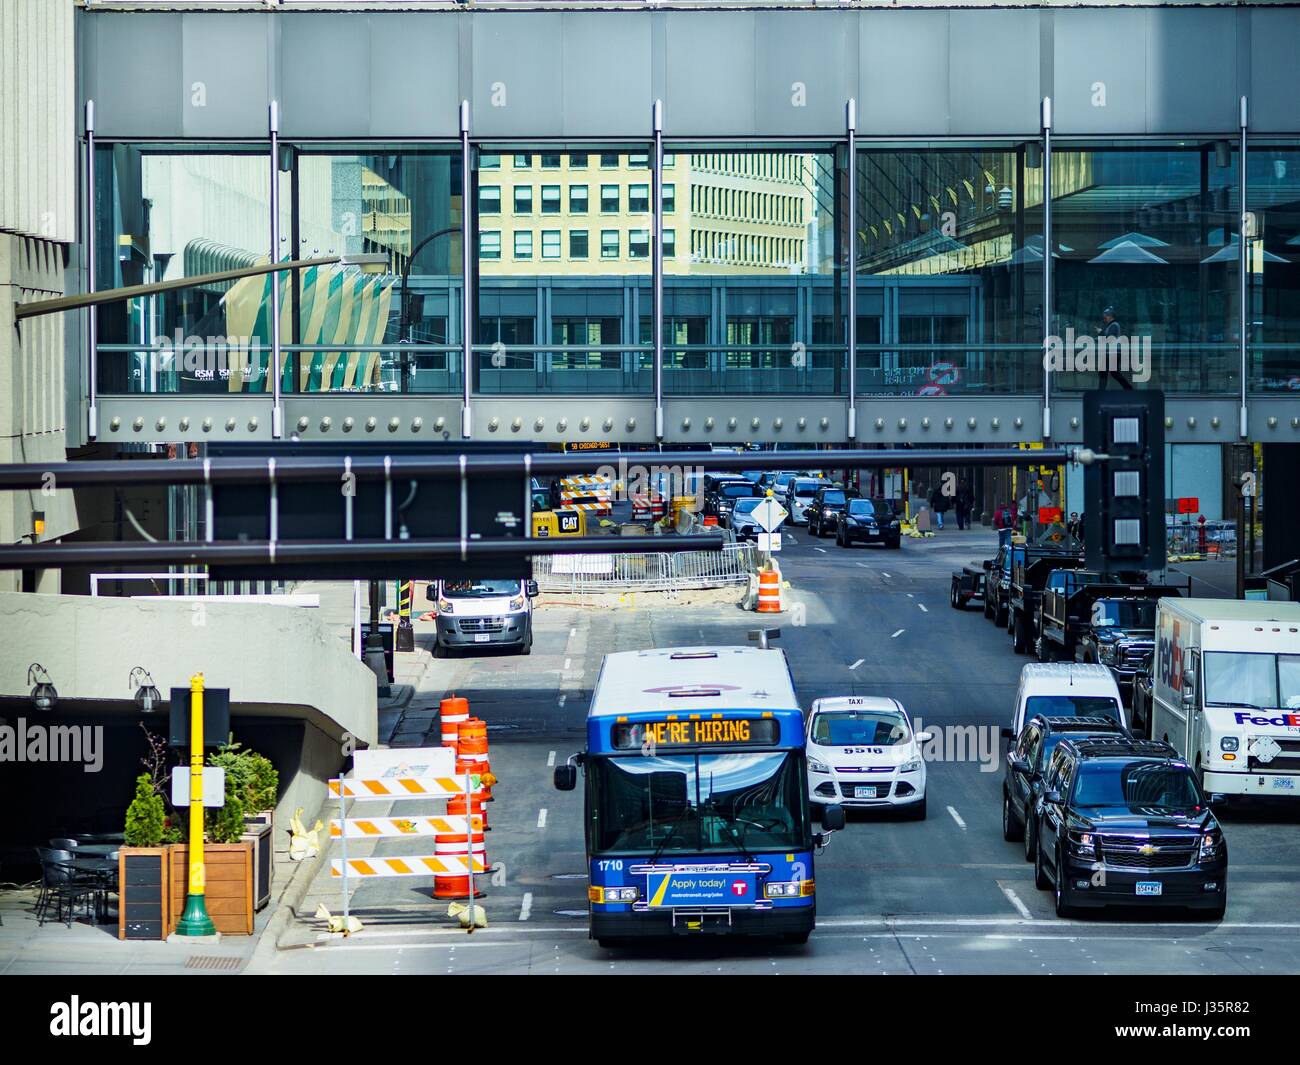 May 3, 2017 - Minneapolis, Minnesota, U.S - The skyway in downtown Minneapolis. The skyways are enclosed pedestrian overpasses that connect downtown buildings. The Minneapolis Skyway was started in the early 1960s as a response to covered shopping malls in the suburbs that were drawing shoppers out of the downtown area. The system grew sporadically until 1974, when the construction of the IDS Center and its center atrium, called the Crystal Court, served as a hub for the downtown skyway system. There are 8 miles of skyways, connecting most of the downtown buildings from Target Field (home of t Stock Photo